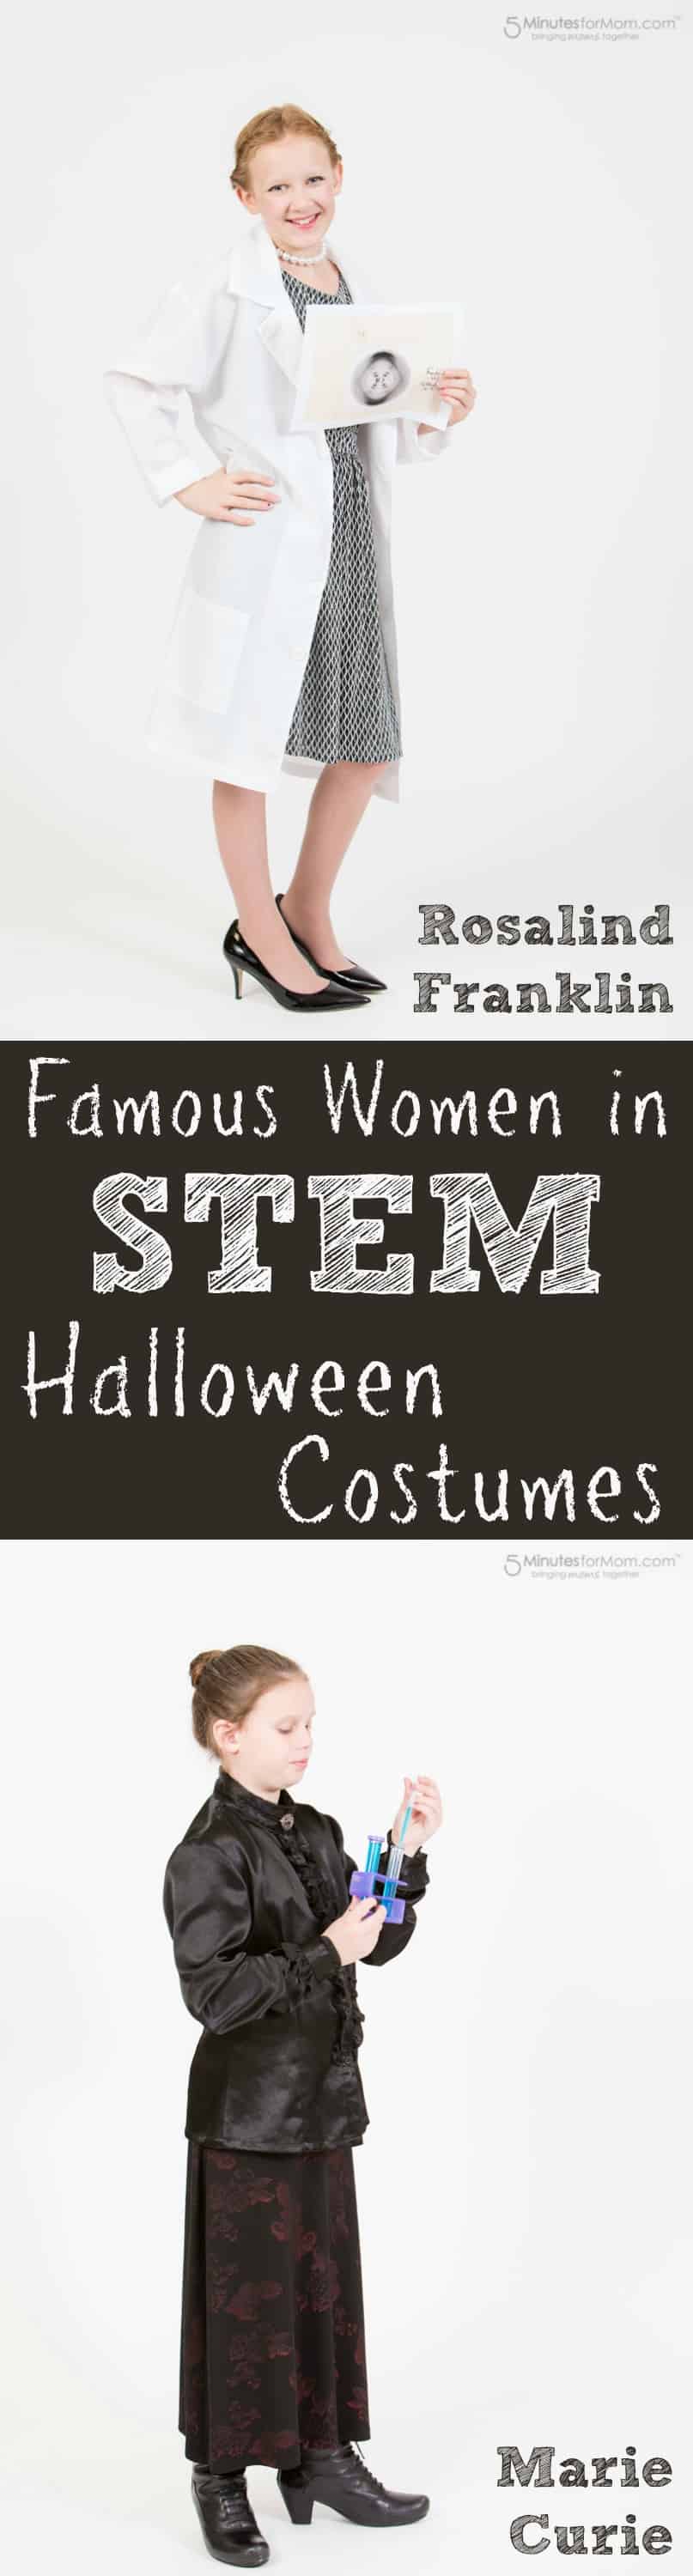 Famous women in STEM Halloween costumes - Rosalind Franklin and Marie Curie